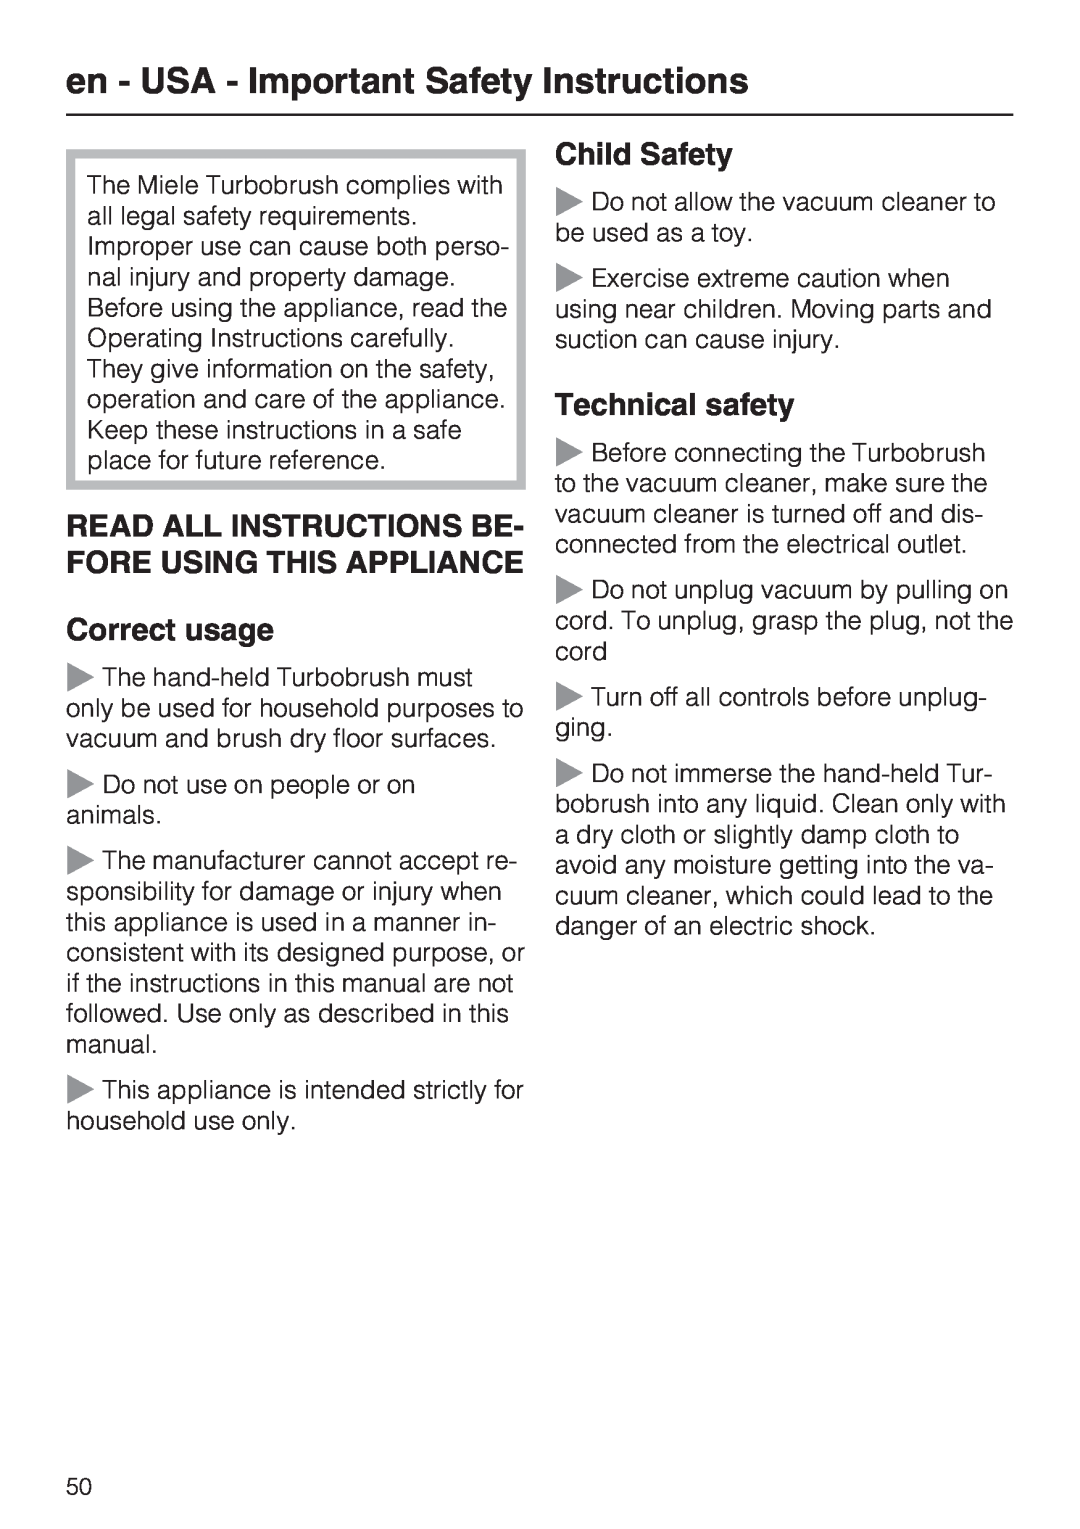 Miele STB 101 manual en - USA - Important Safety Instructions, Correct usage, Child Safety, Technical safety 